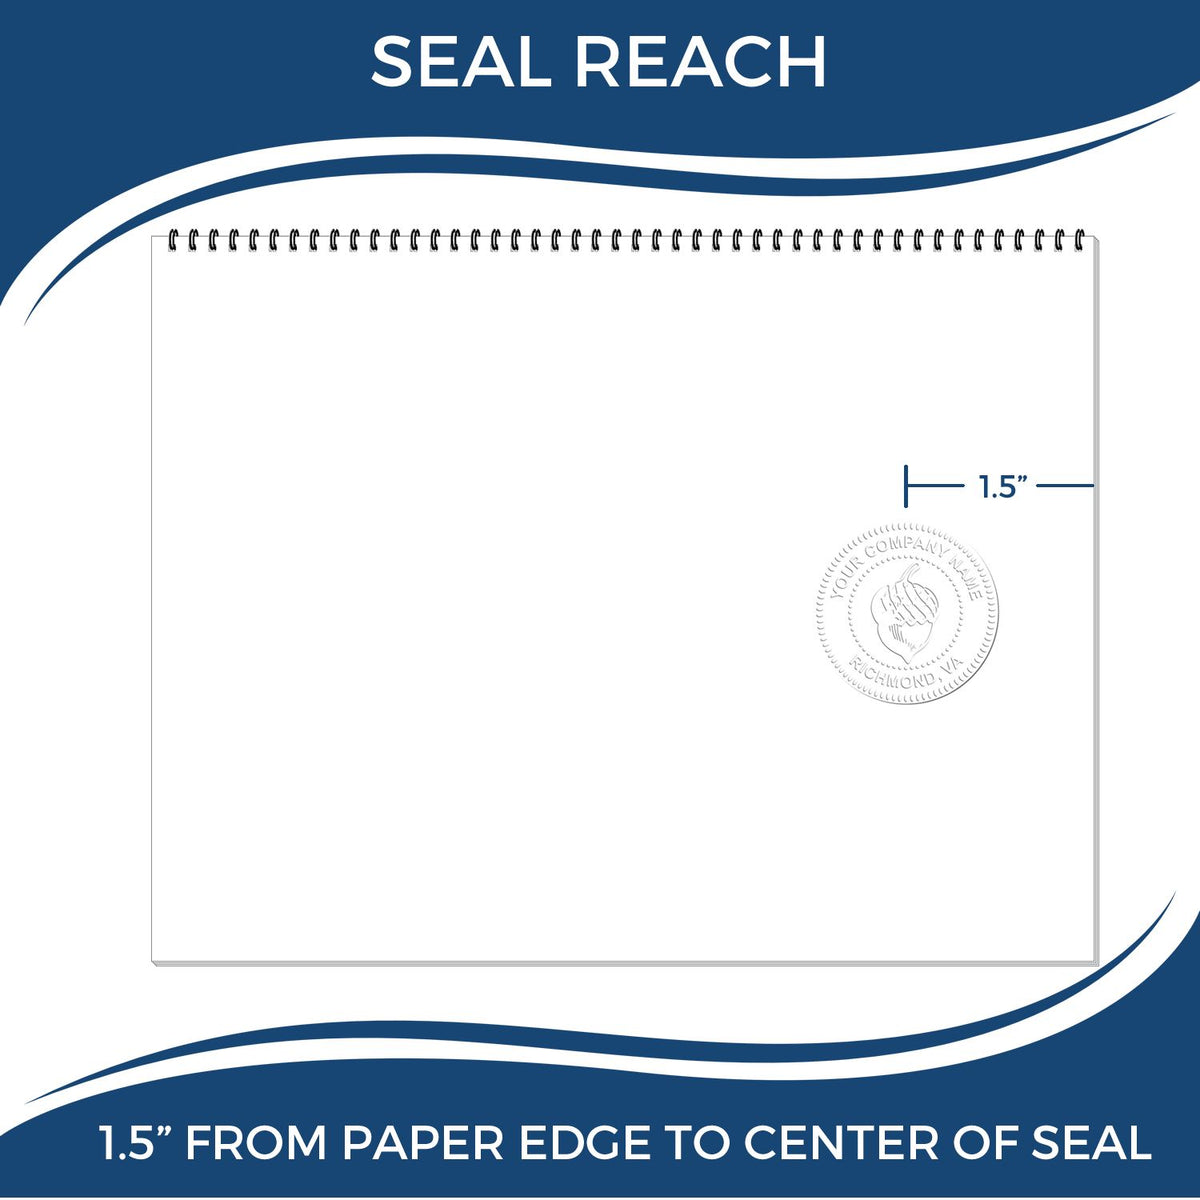 An infographic showing the seal reach which is represented by a ruler and a miniature seal image of the Gift Minnesota Landscape Architect Seal